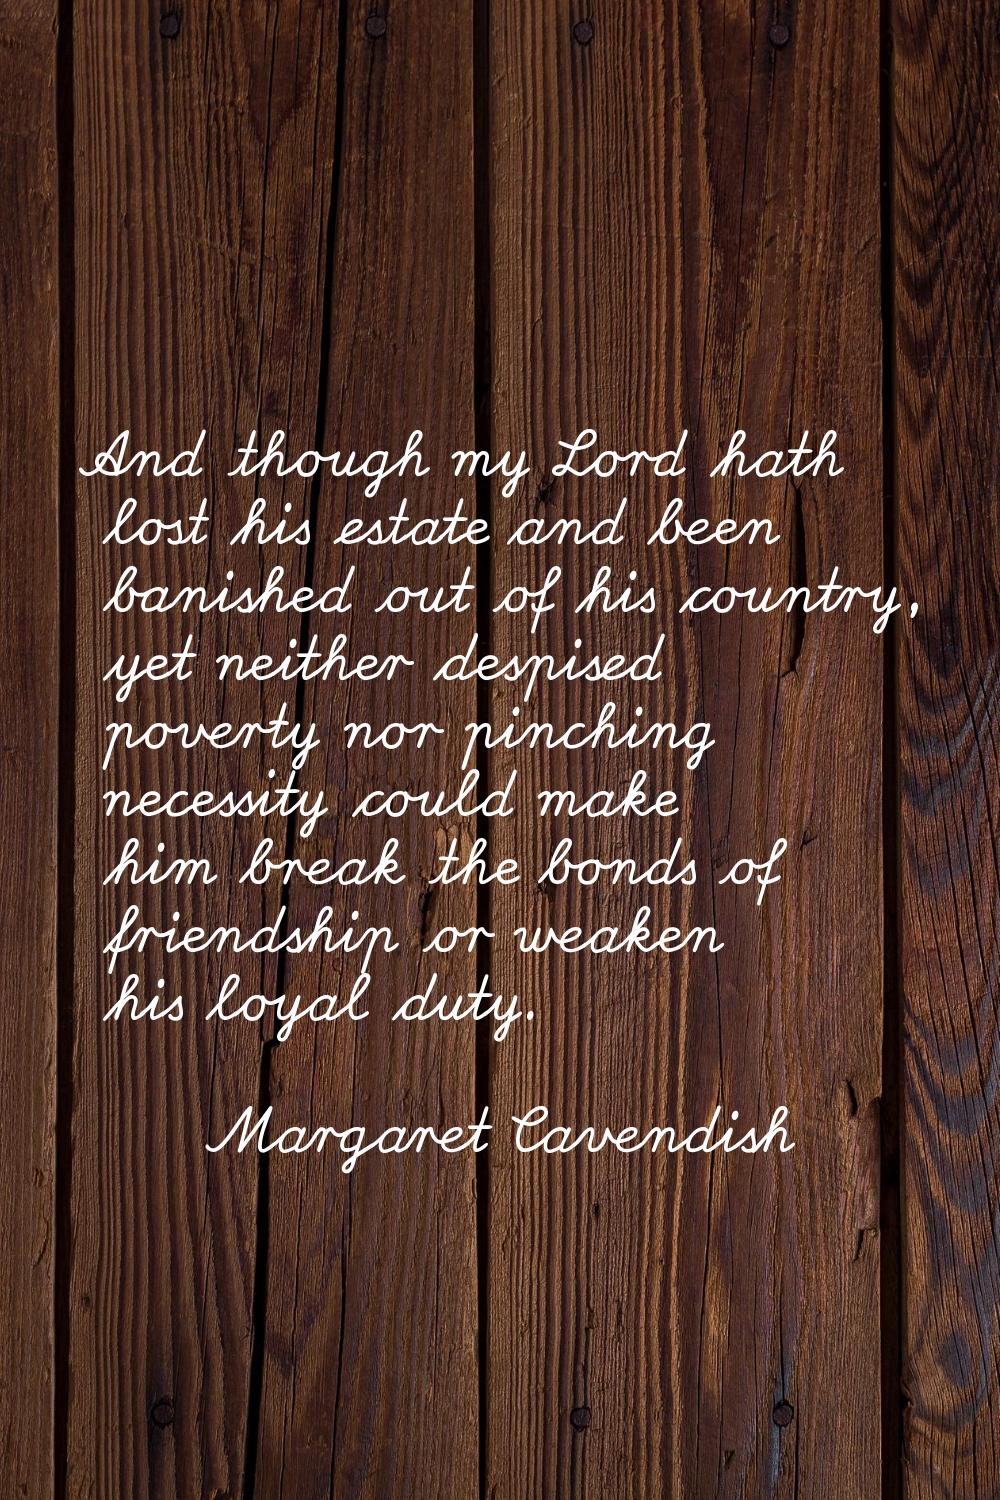 And though my Lord hath lost his estate and been banished out of his country, yet neither despised 